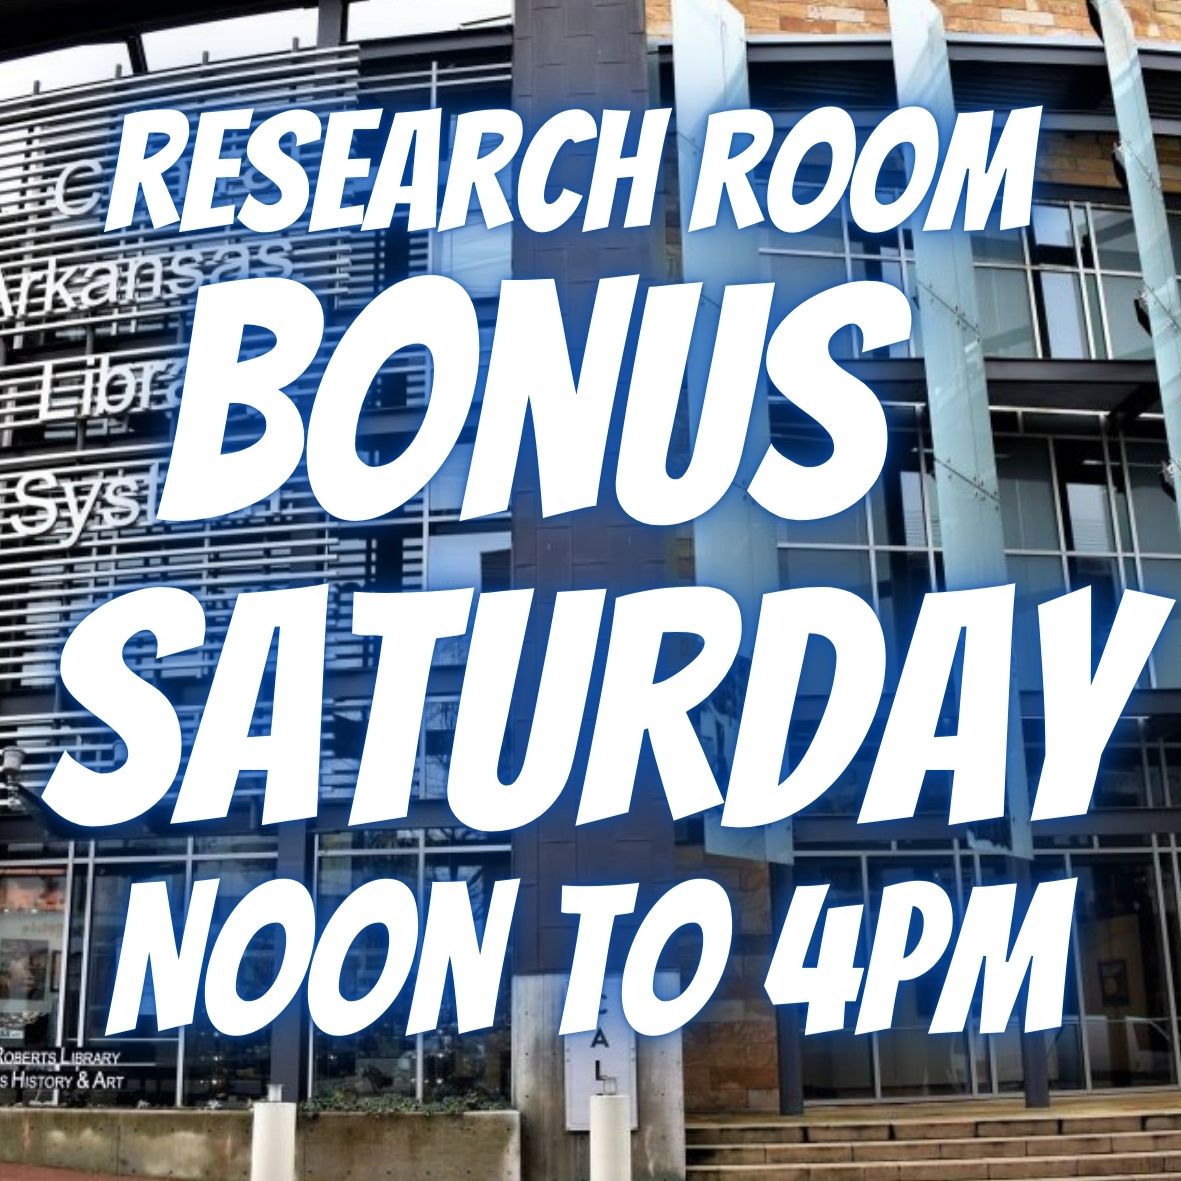 CALS Roberts Library building with works RESEARCH ROOM BONUS SATURDAY NOON TO 4PM